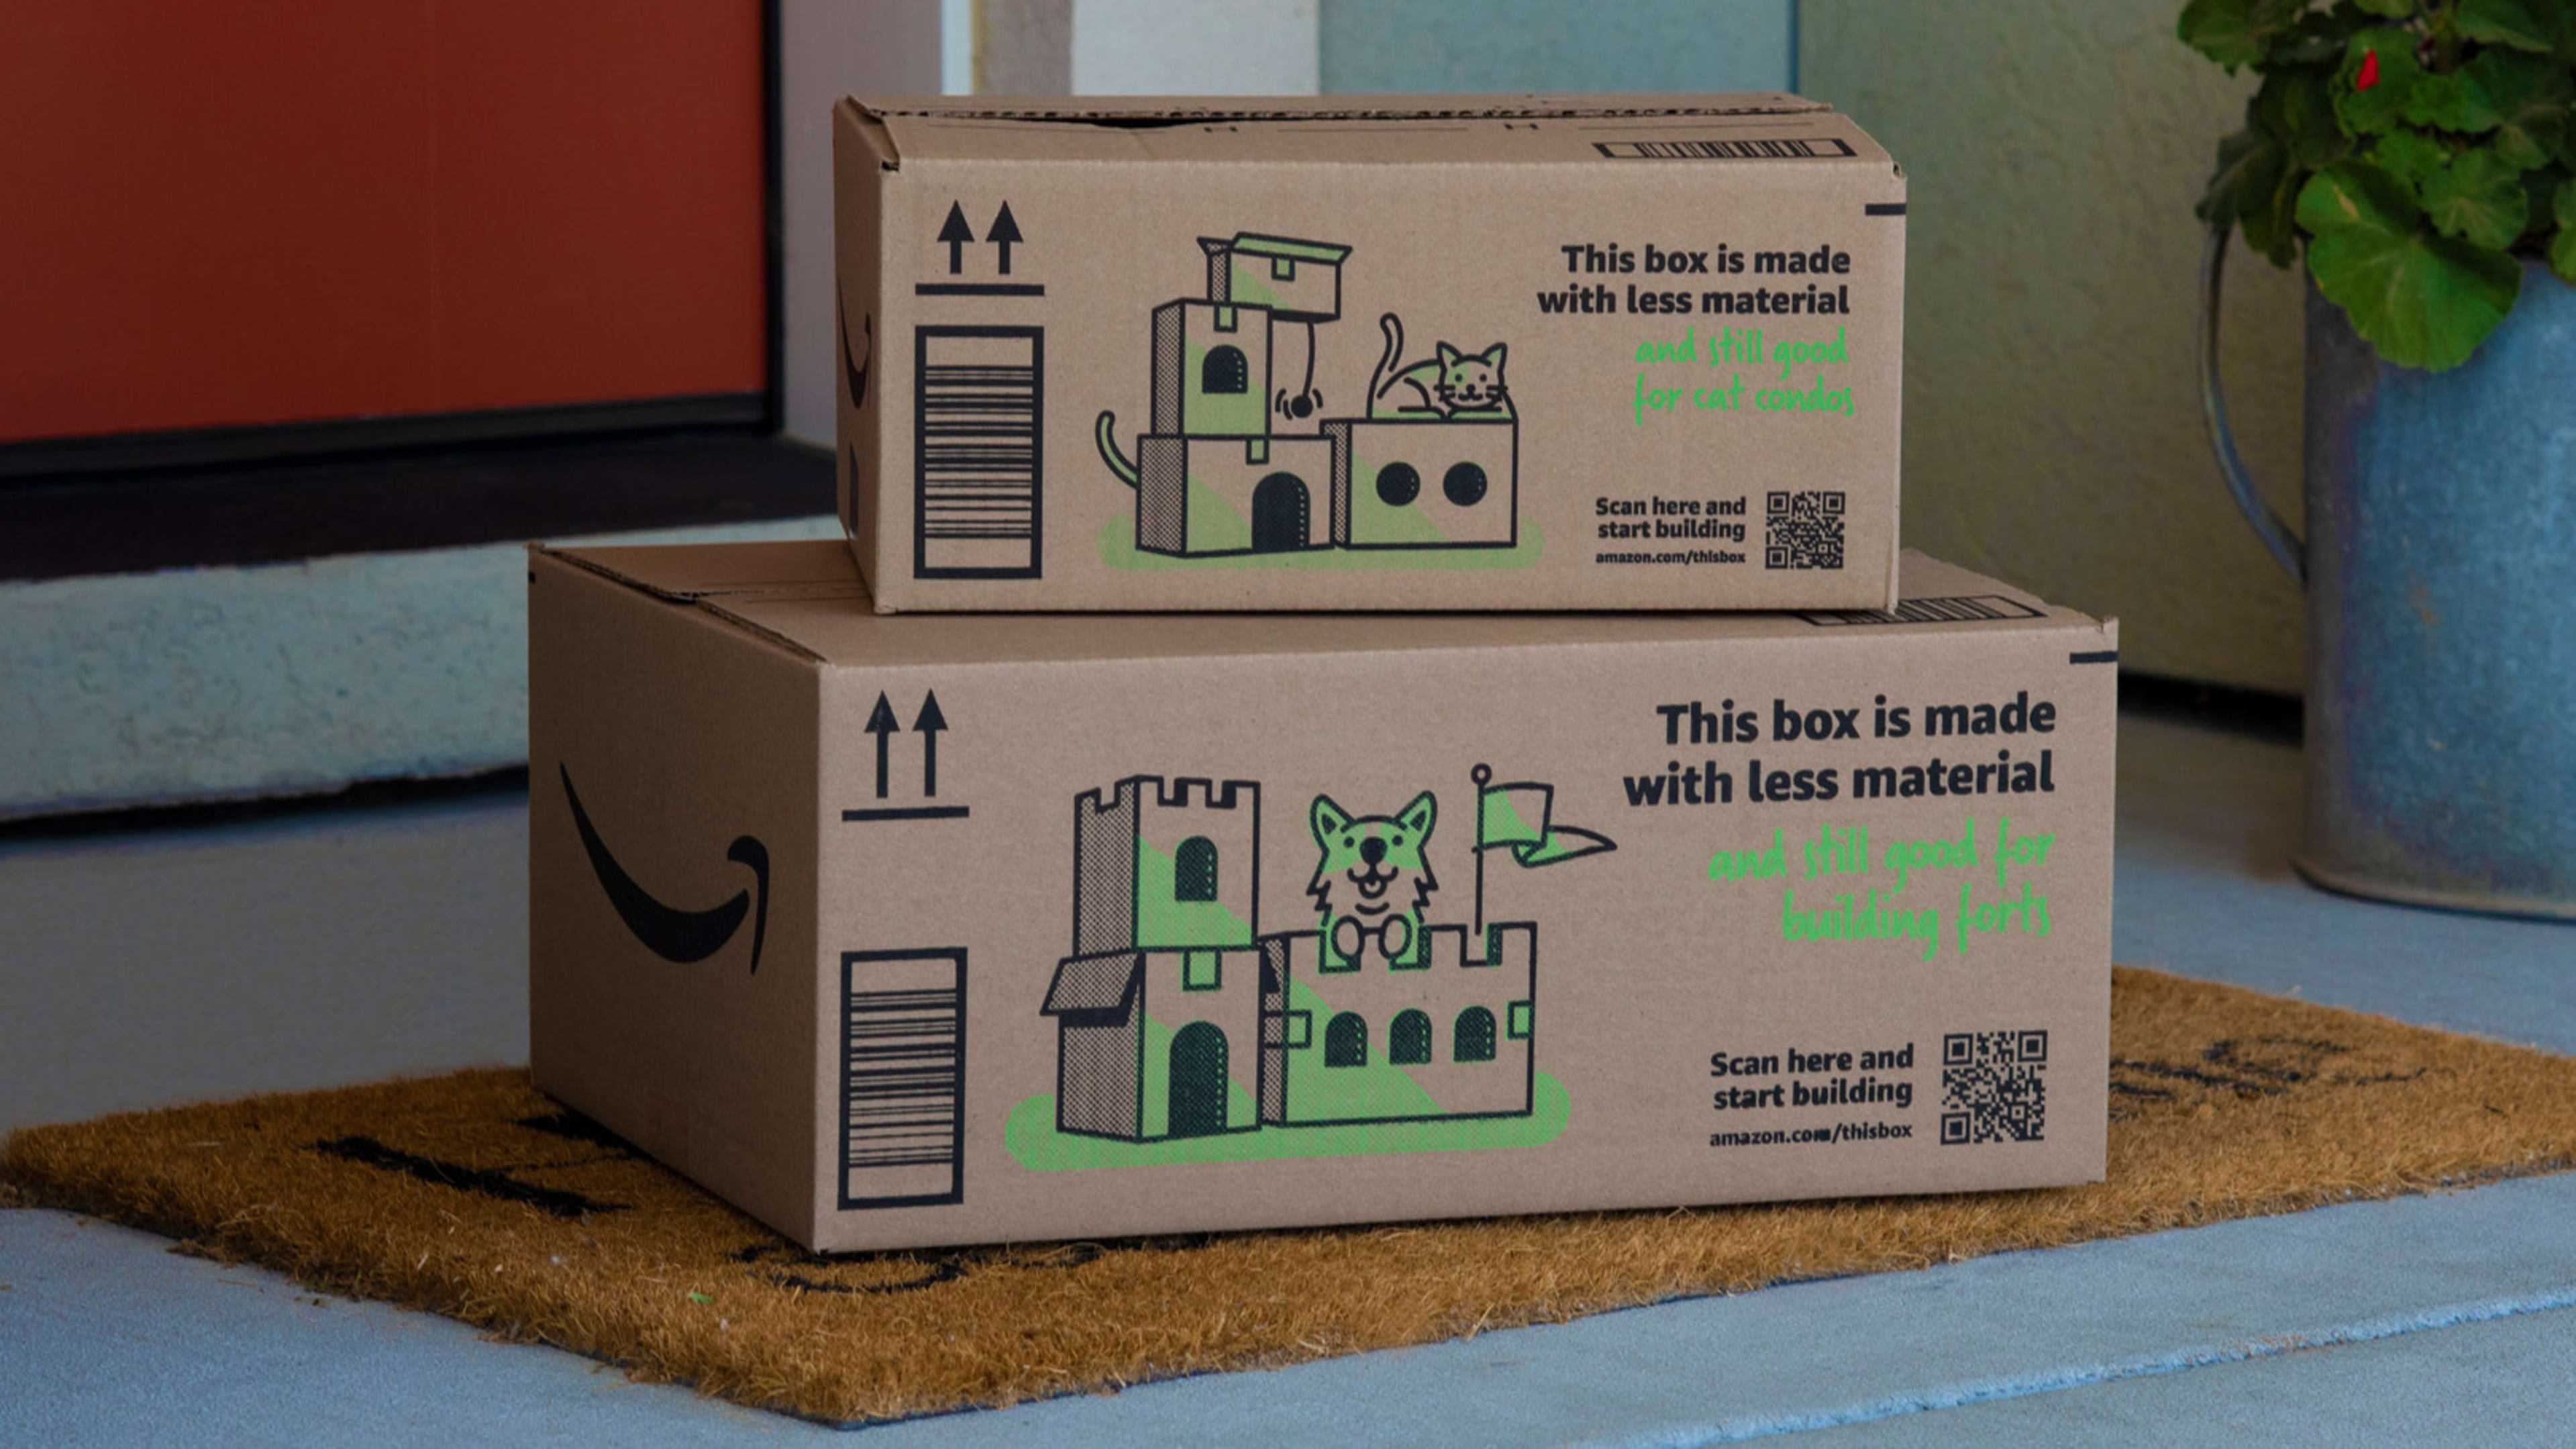 Inside Amazon’s quest to use less cardboard